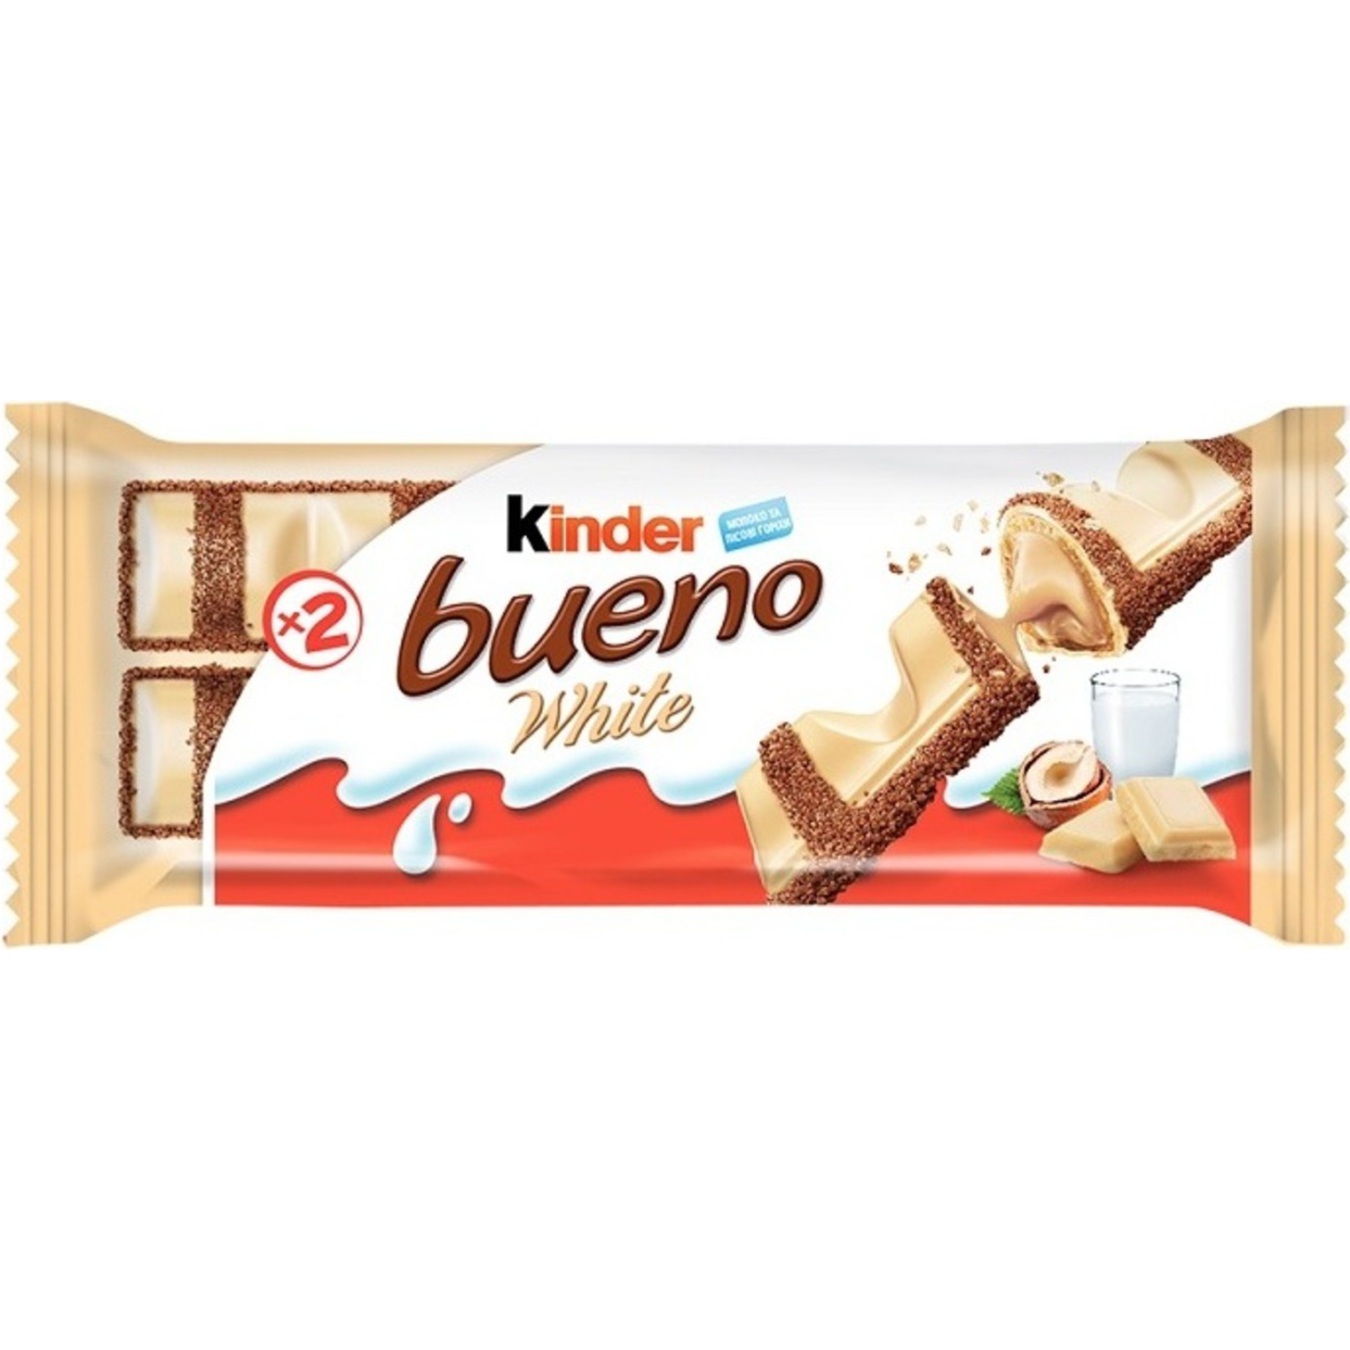 Kinder Bueno White Wafer With Milky And Nut Filling Covered With White Chocolate Waffers 39g